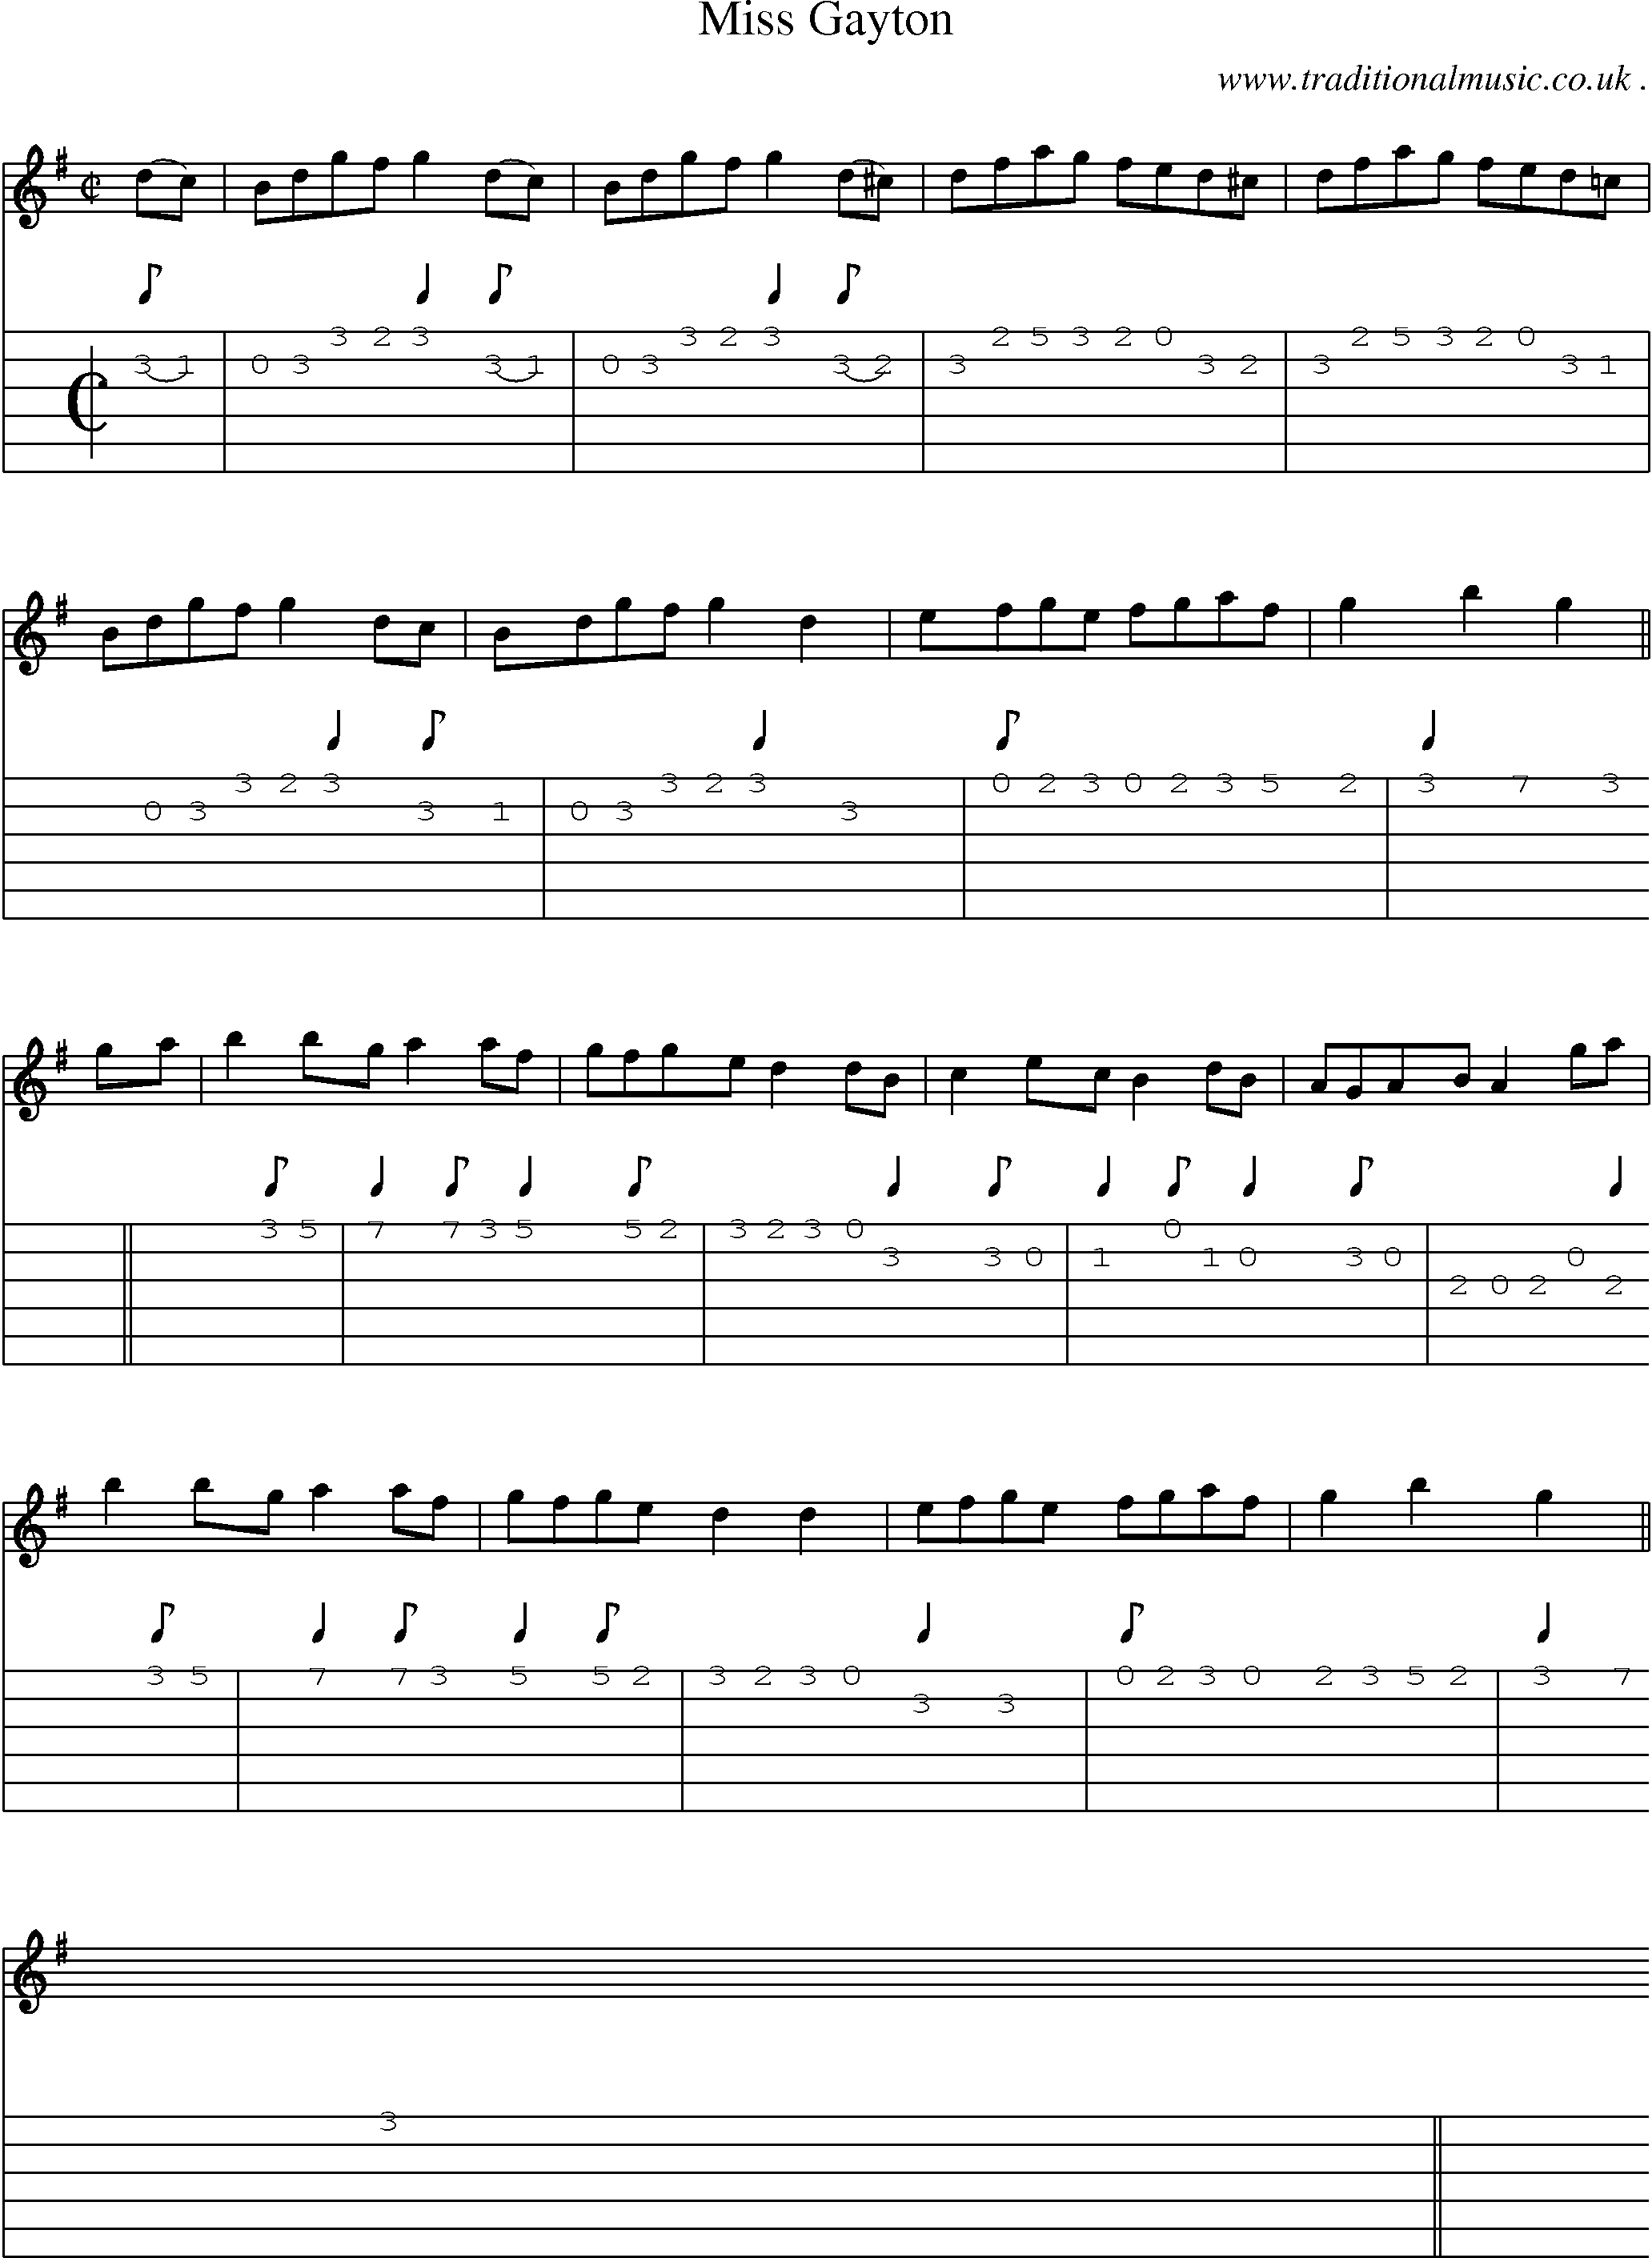 Sheet-music  score, Chords and Guitar Tabs for Miss Gayton